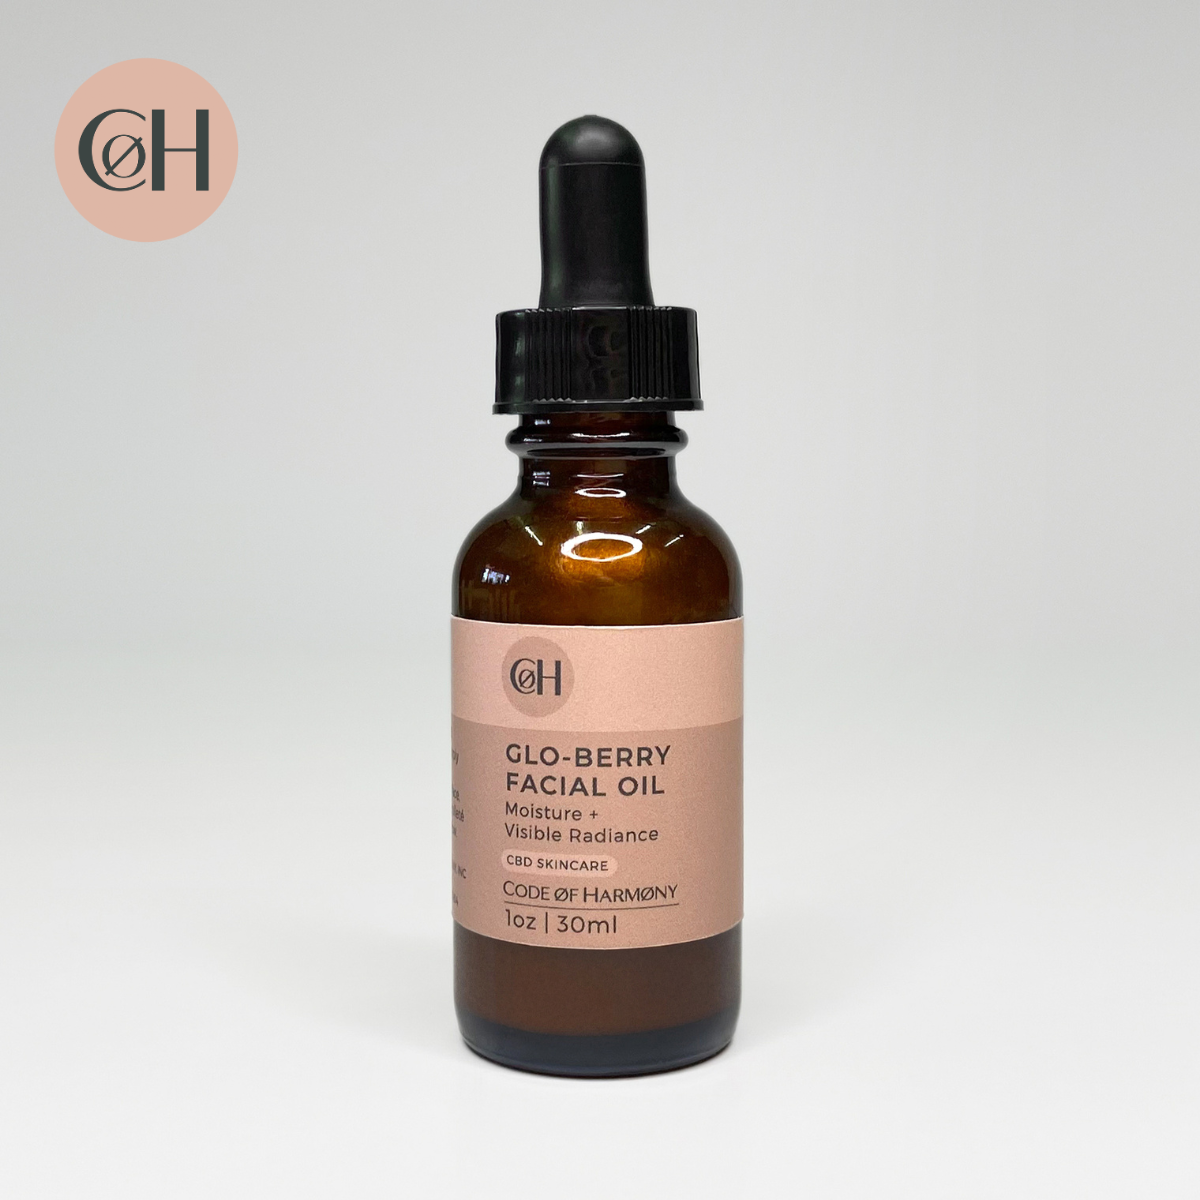 Facial Oil for Glistening Skin | Leaves Skin Glossy and Glowing